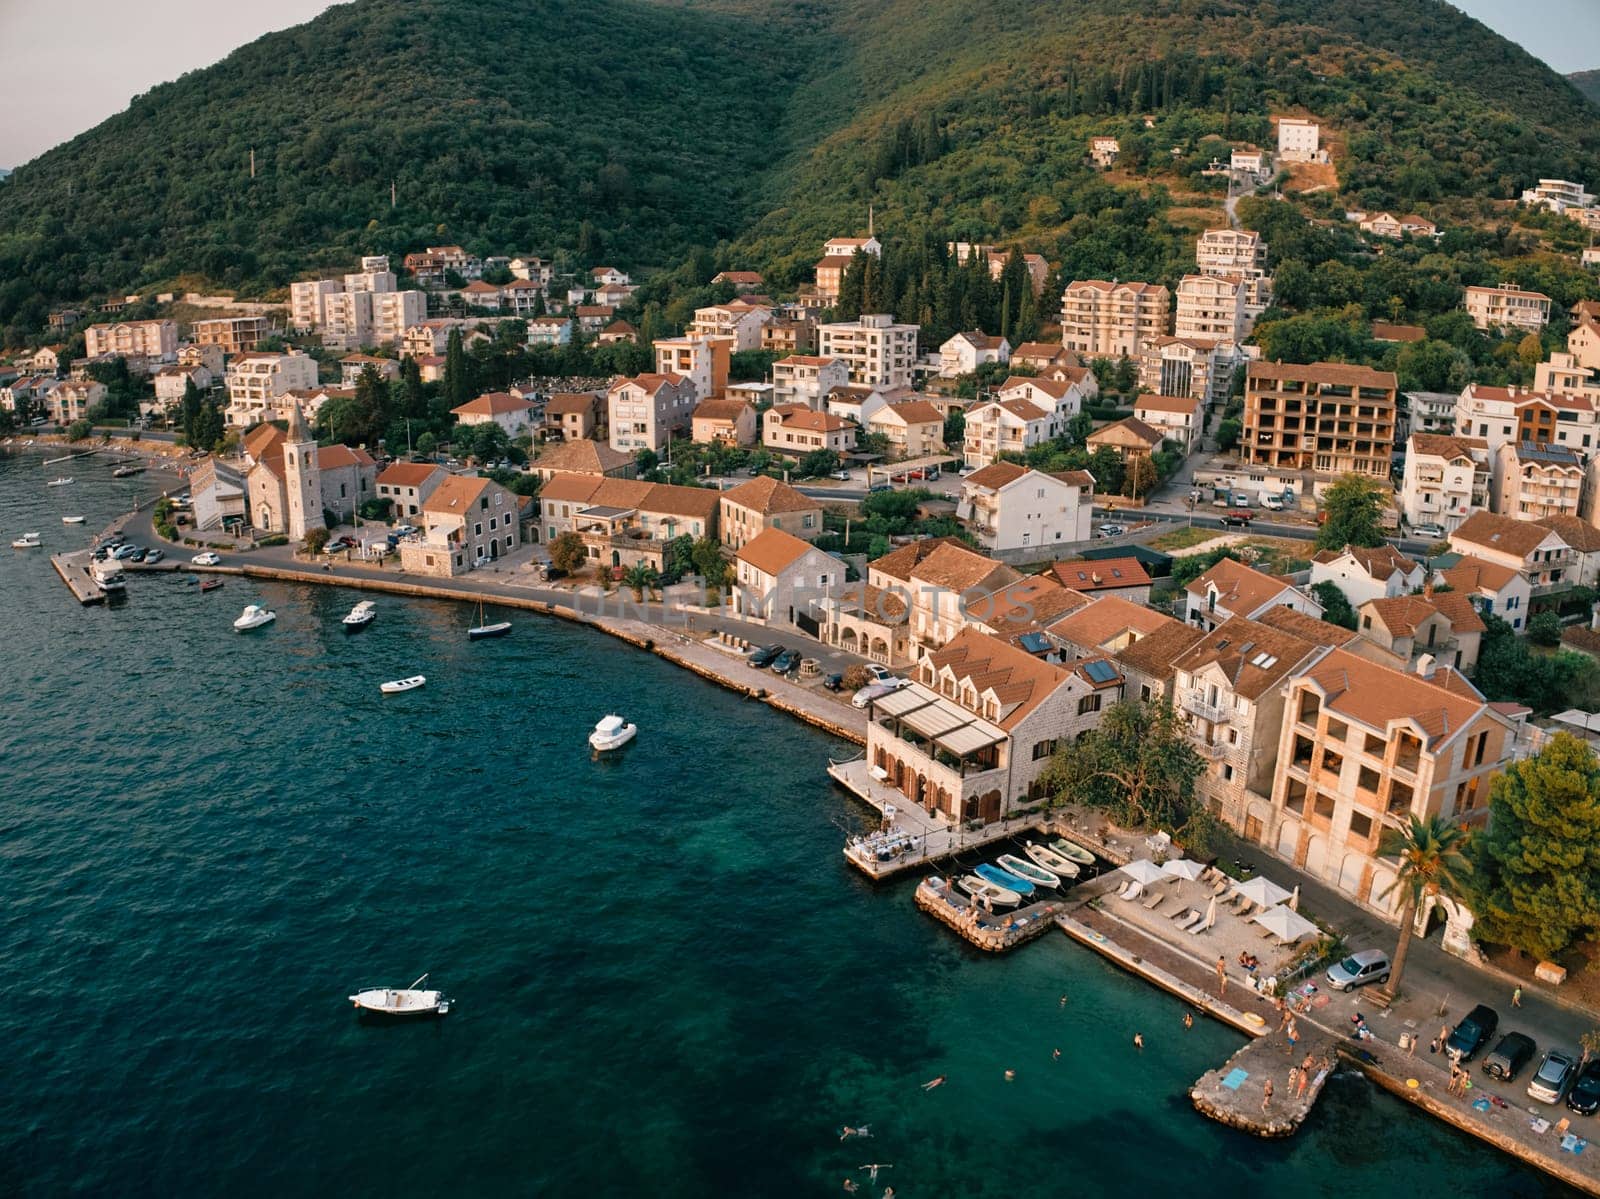 Promenade with old houses and moored boats. Tivat, Montenegro. Drone by Nadtochiy